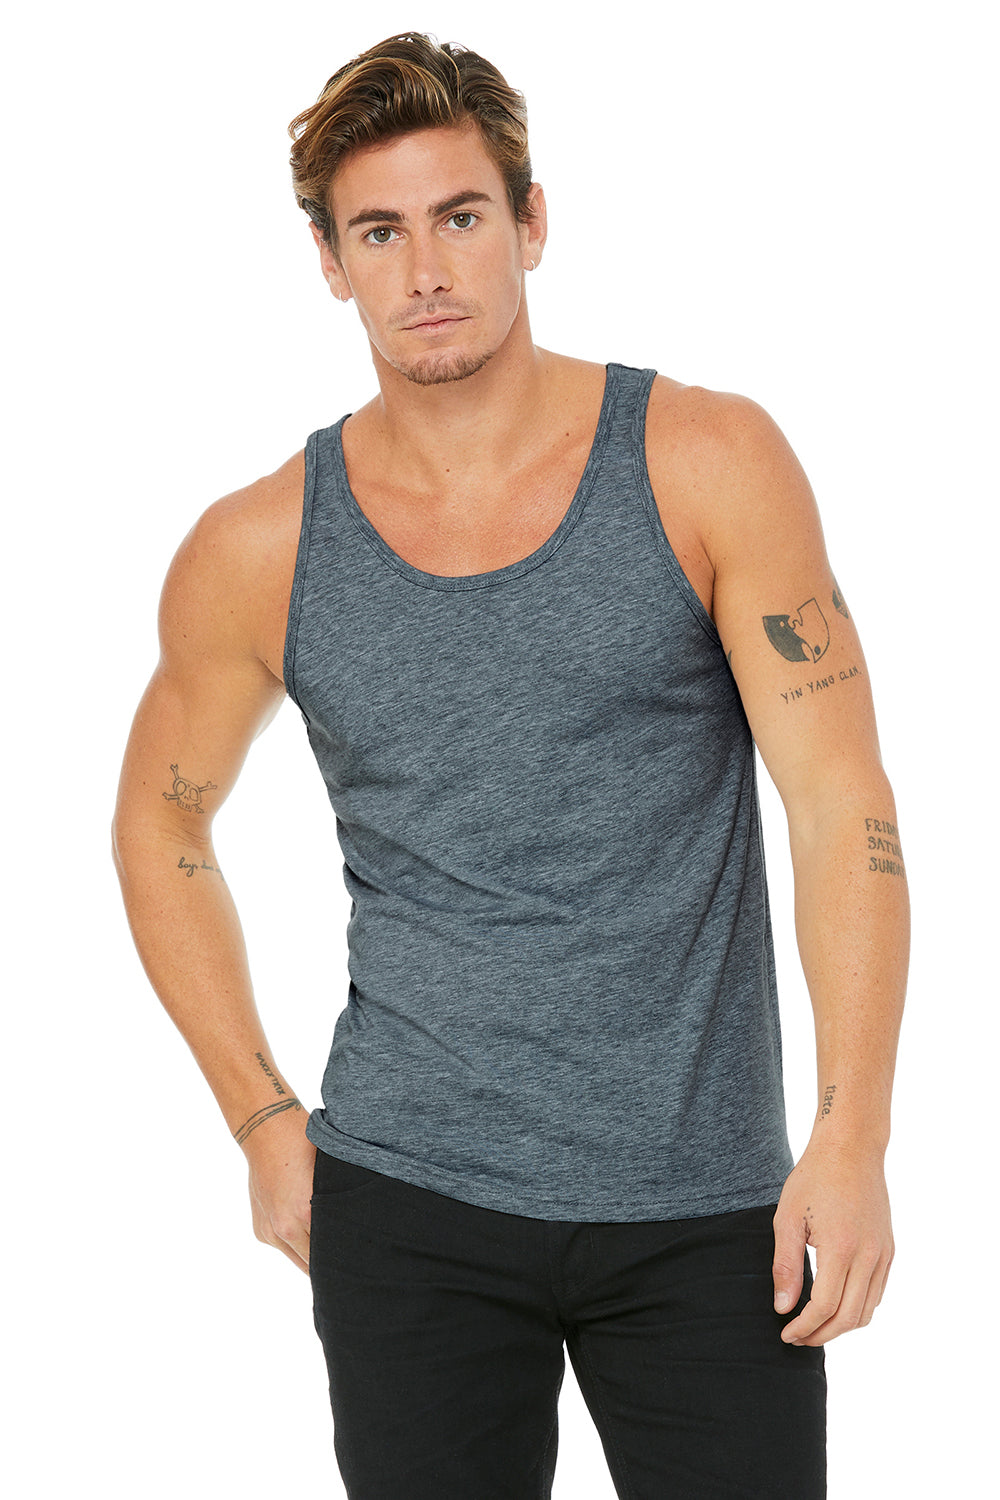 Bella + Canvas BC3480/3480 Mens Jersey Tank Top Heather Slate Blue Model Front